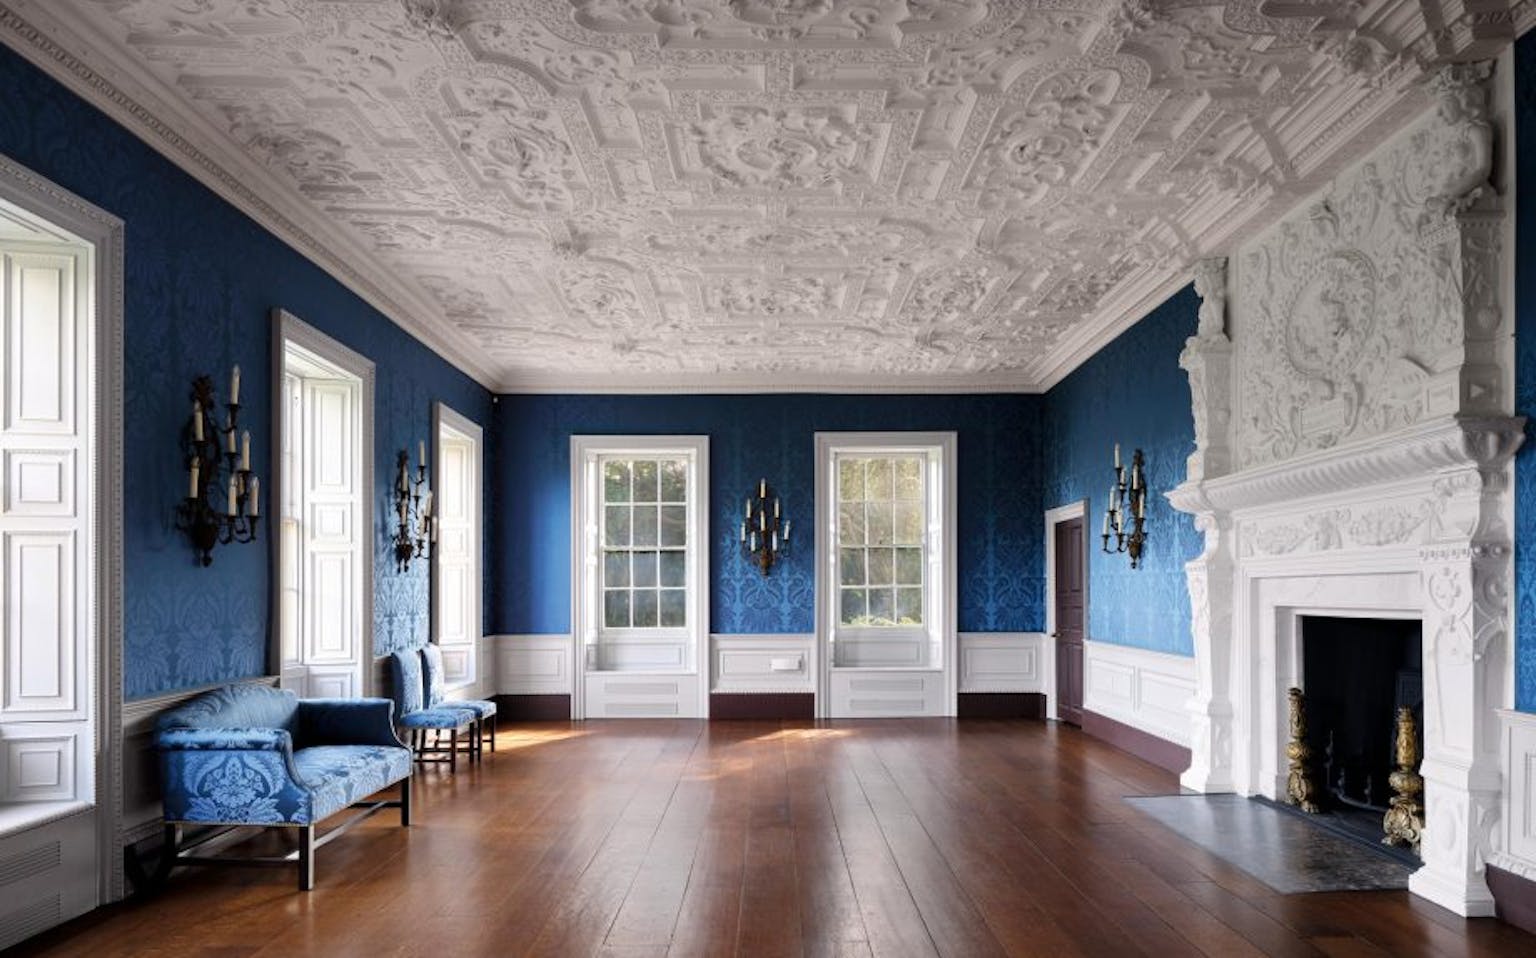 A highly decorated plaster ceiling with blue damask walls and wooden floor